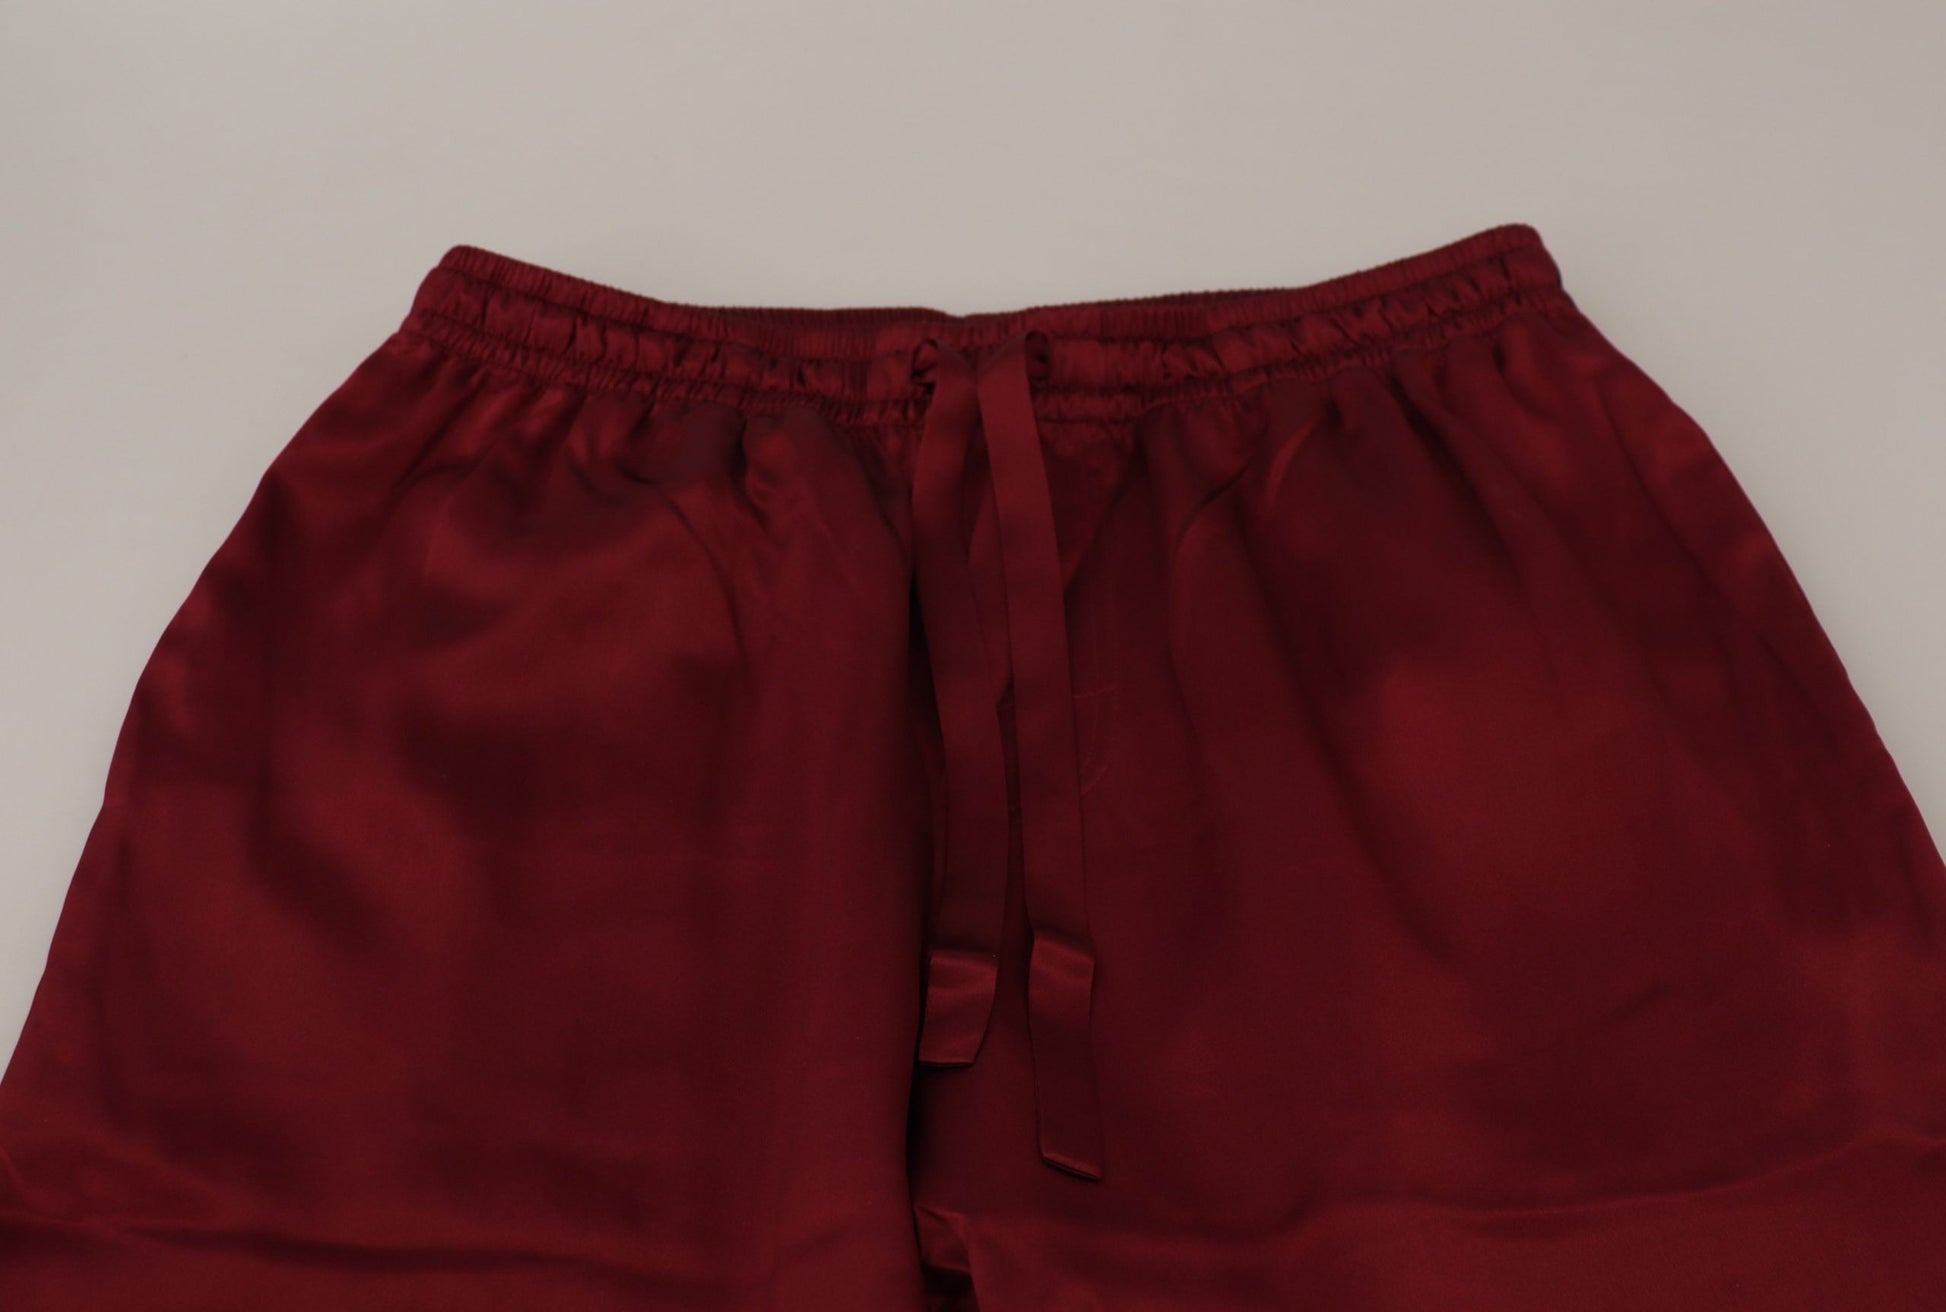 Dolce & Gabbana Bordeaux Silk DG Sleep Lounge Pants - Designed by Dolce & Gabbana Available to Buy at a Discounted Price on Moon Behind The Hill Online Designer Discount Store